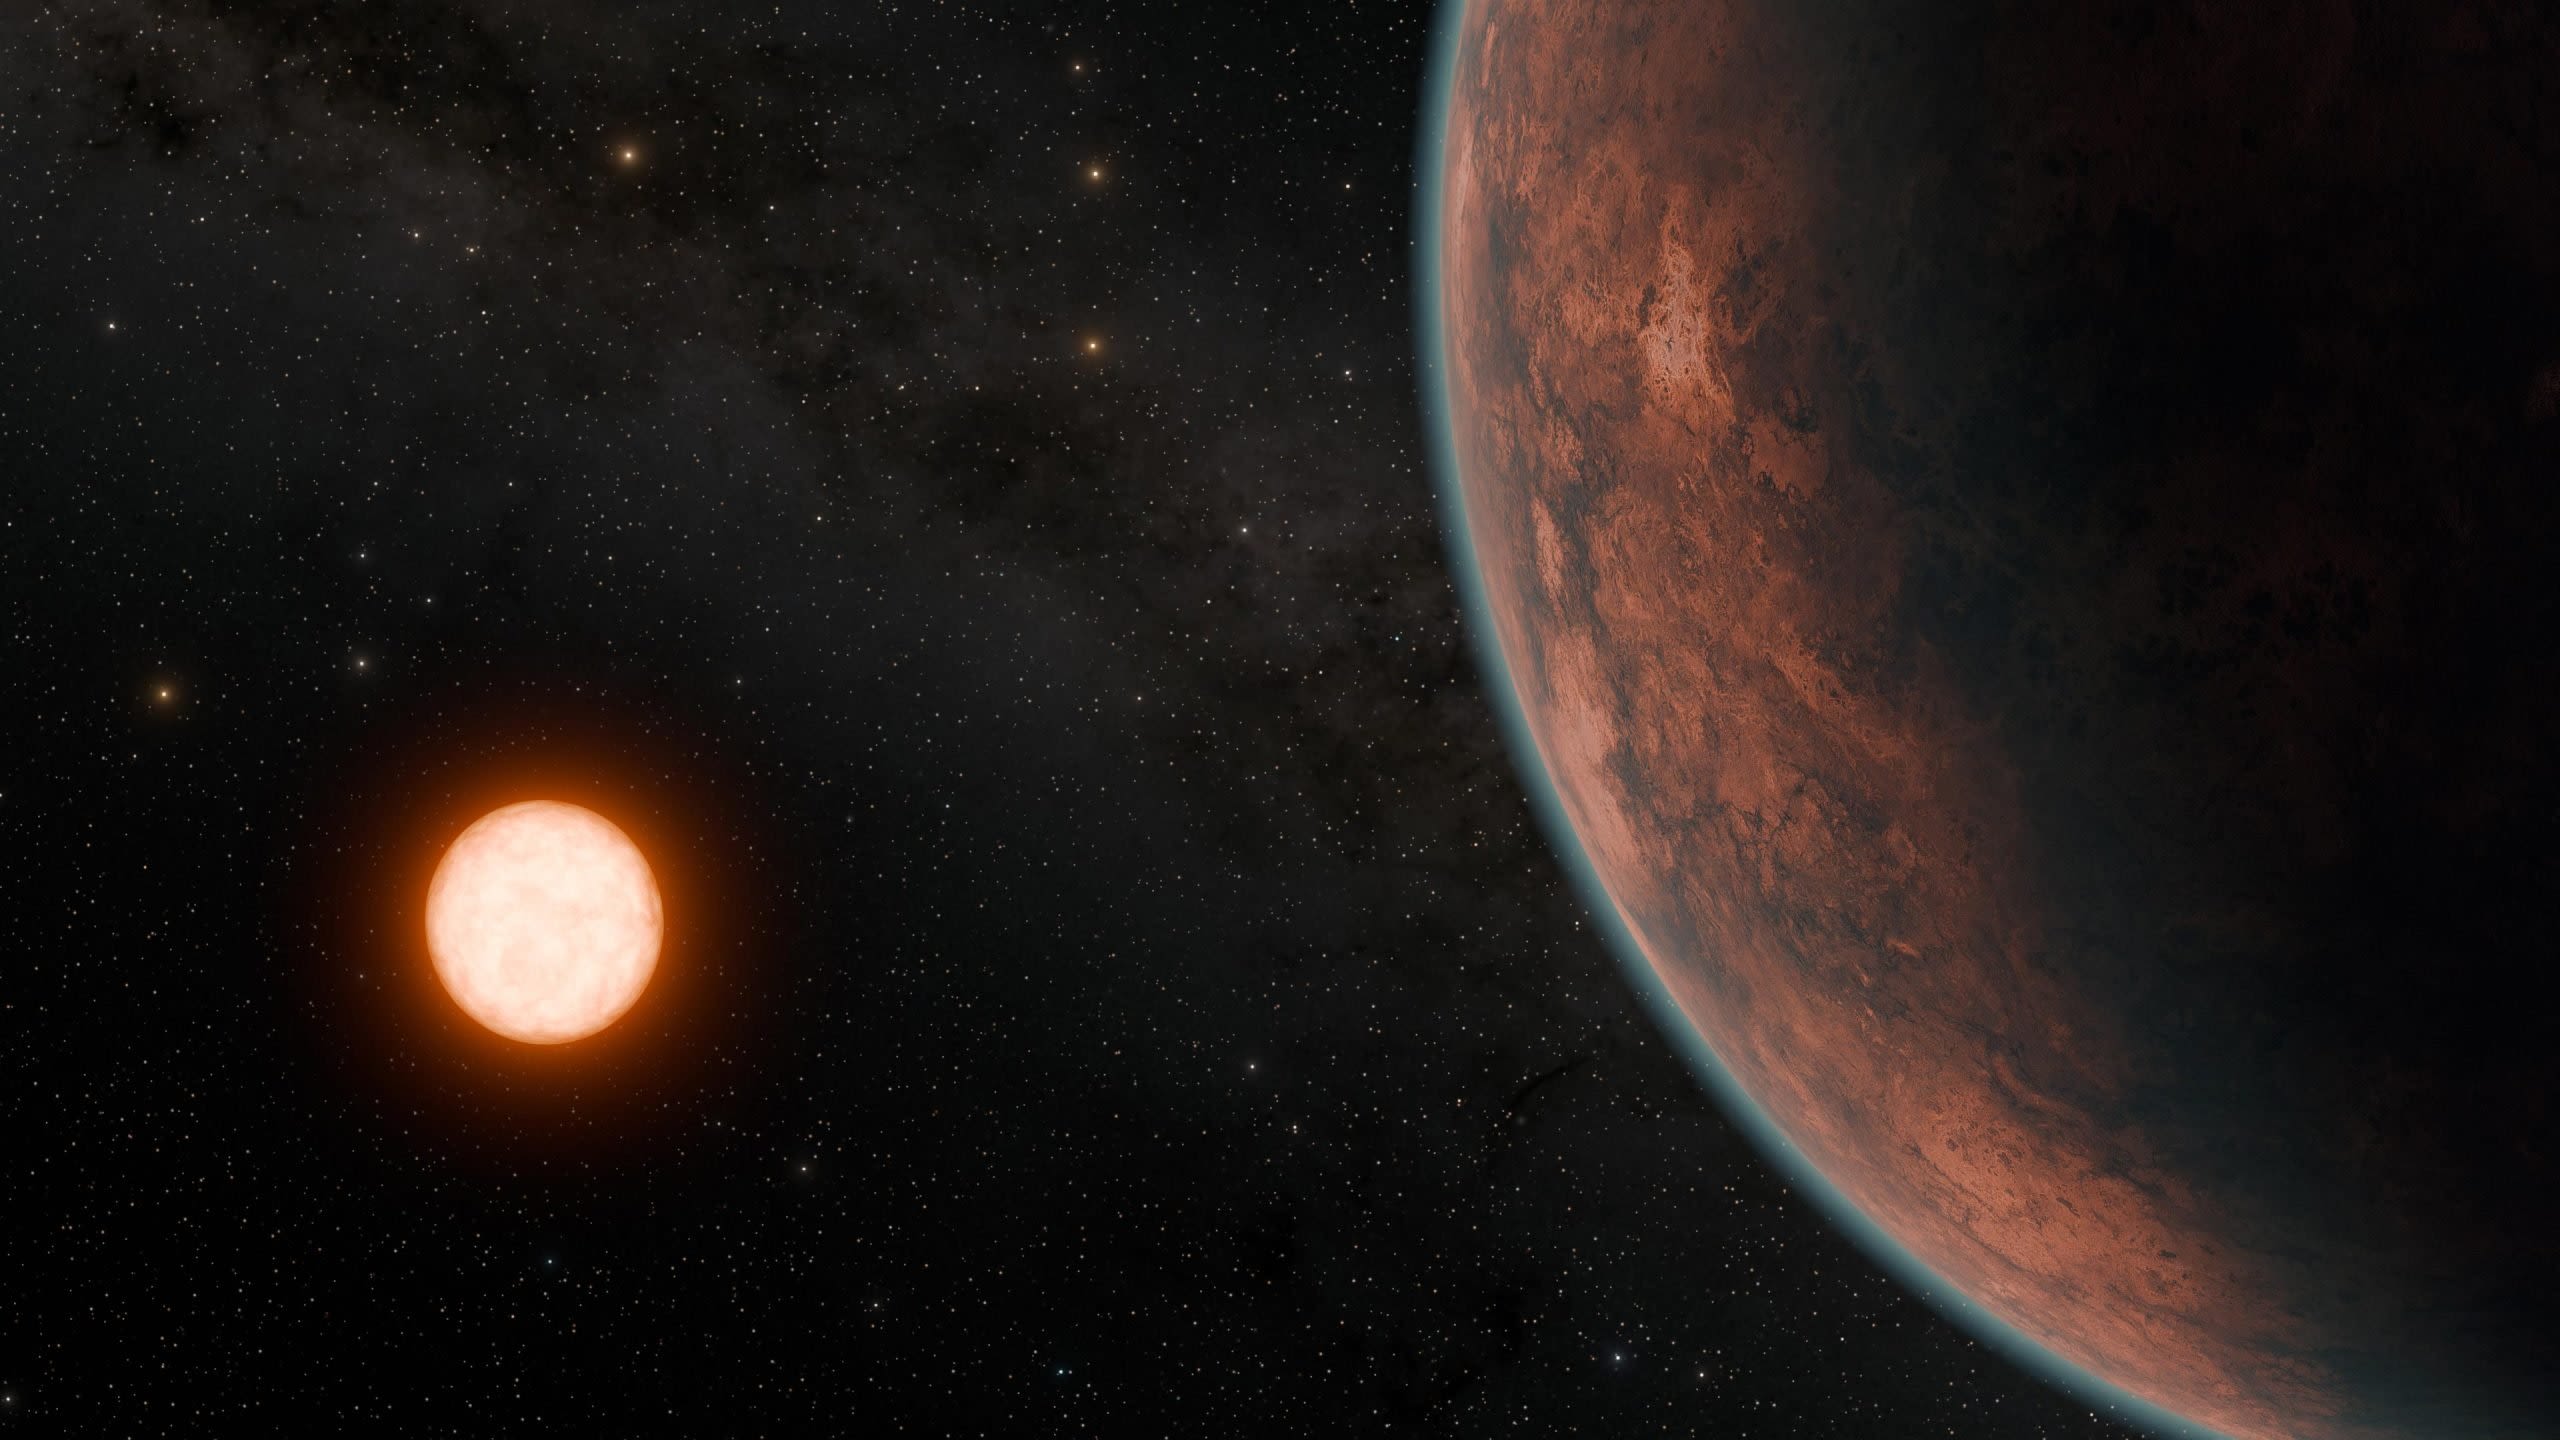 “Exo-Venus” Discovered: A Potentially Habitable World Just 40 Light-Years From Earth